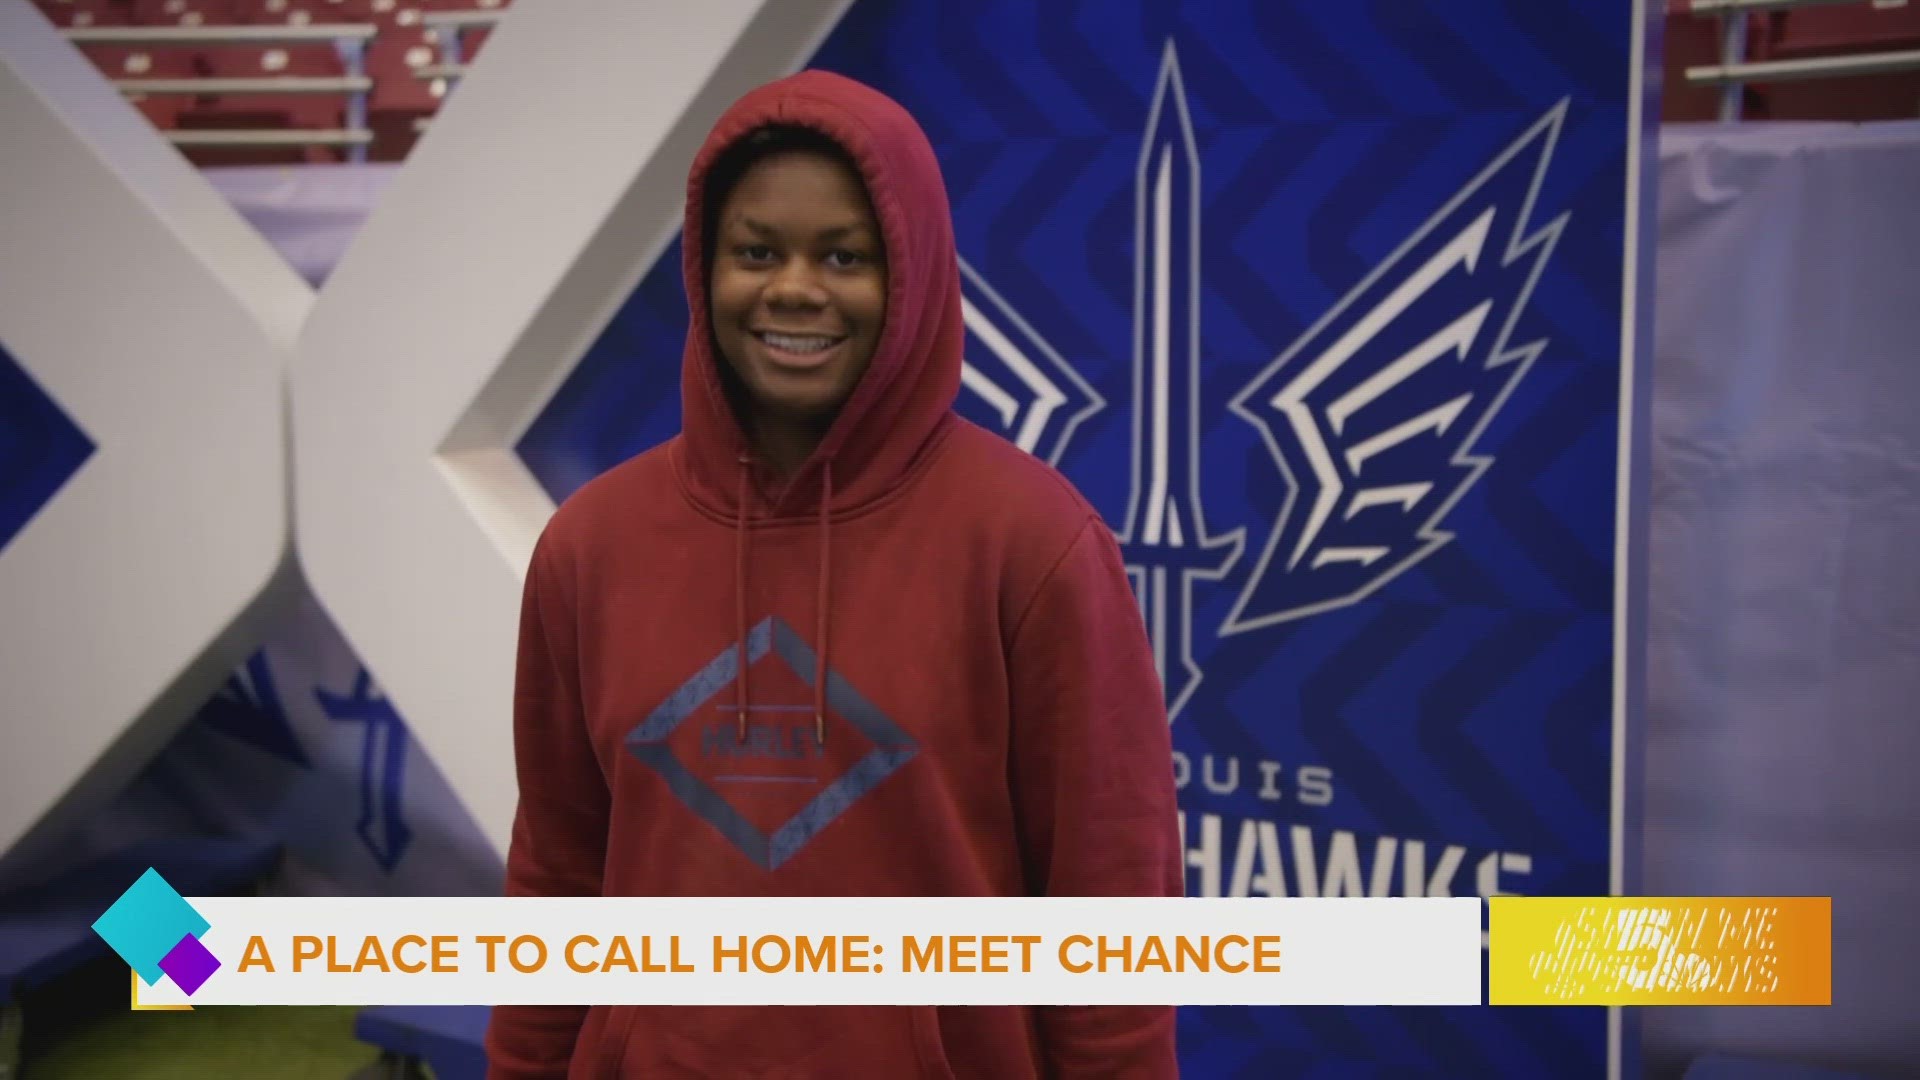 Earlier this year, Chance hit the field for an experience he wouldn’t soon forget in today’s A Place to Call Home.